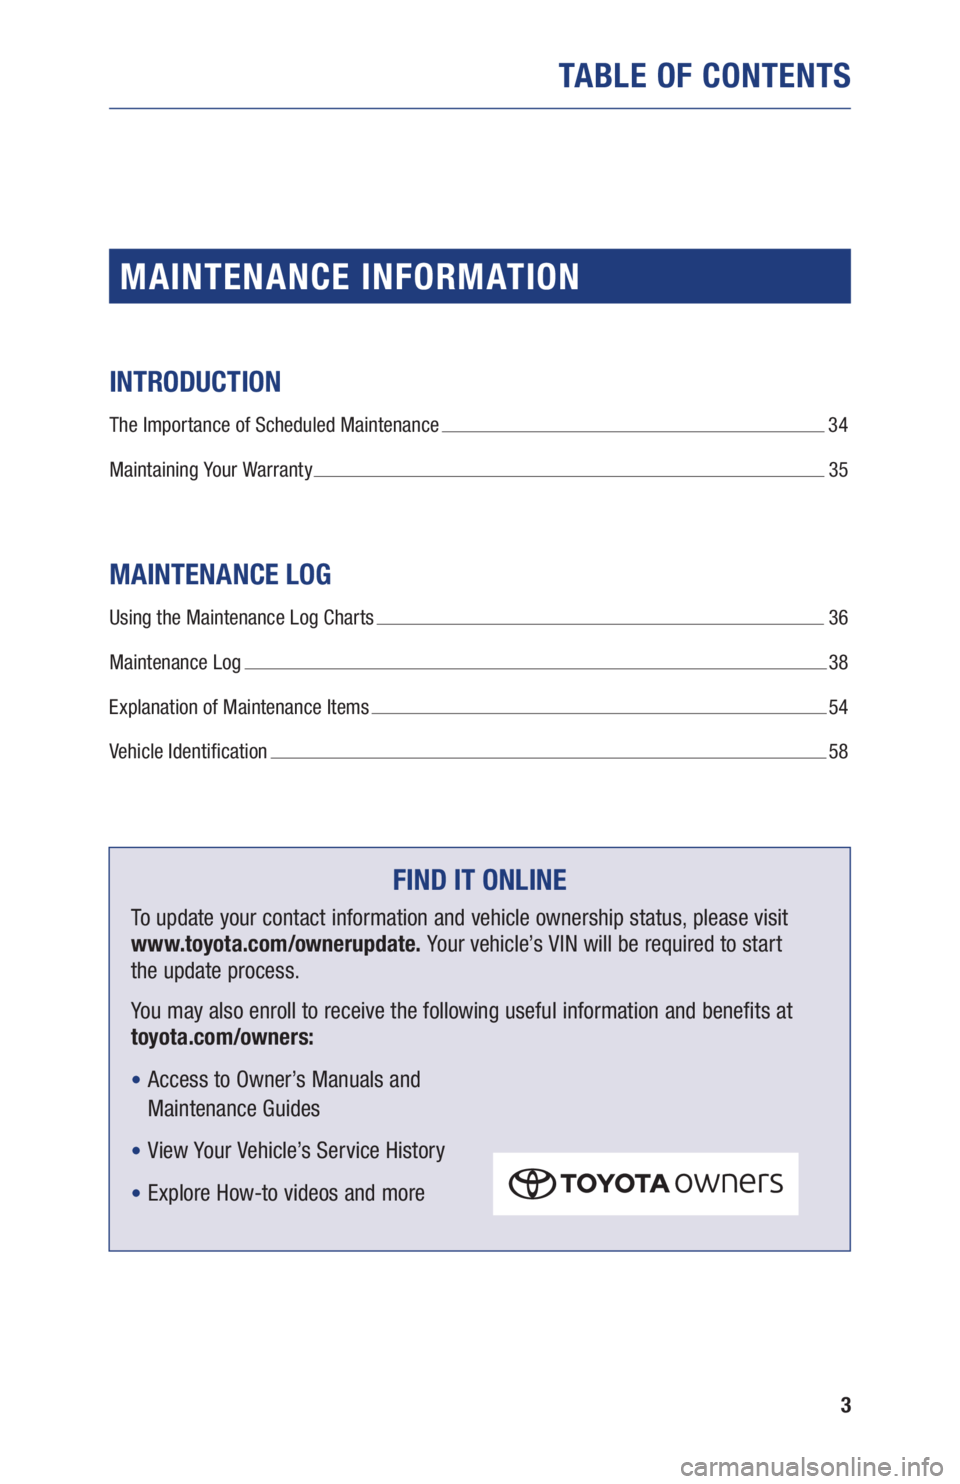 TOYOTA RAV4 HYBRID 2019  Warranties & Maintenance Guides (in English) 3
TABLE OF CONTENTS
MAINTENANCE INFORMATION
INTRODUCTION
The Importance of Scheduled Maintenance  34
Maintaining Your Warranty 
 35
MAINTENANCE LOG
Using the Maintenance Log Charts  36
Maintenance Log